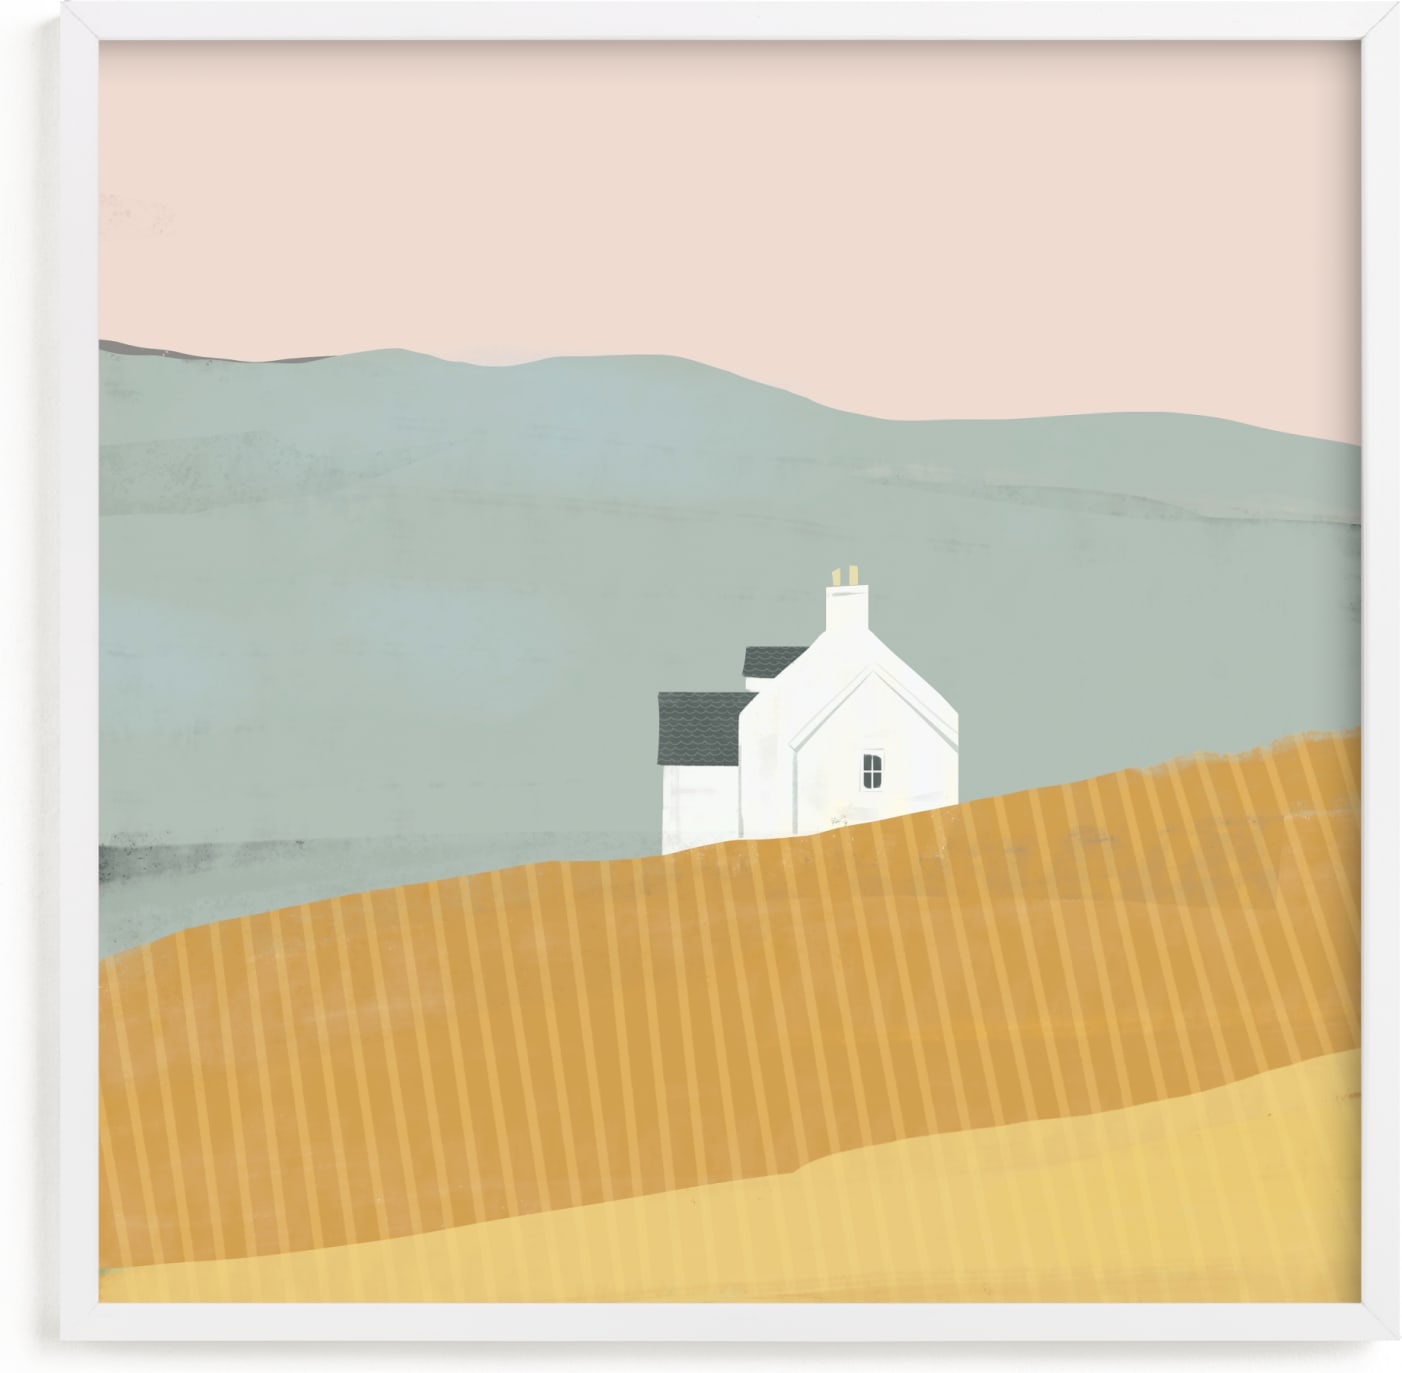 This is a yellow art by Laura Mitchell called Little White House on Prairie.